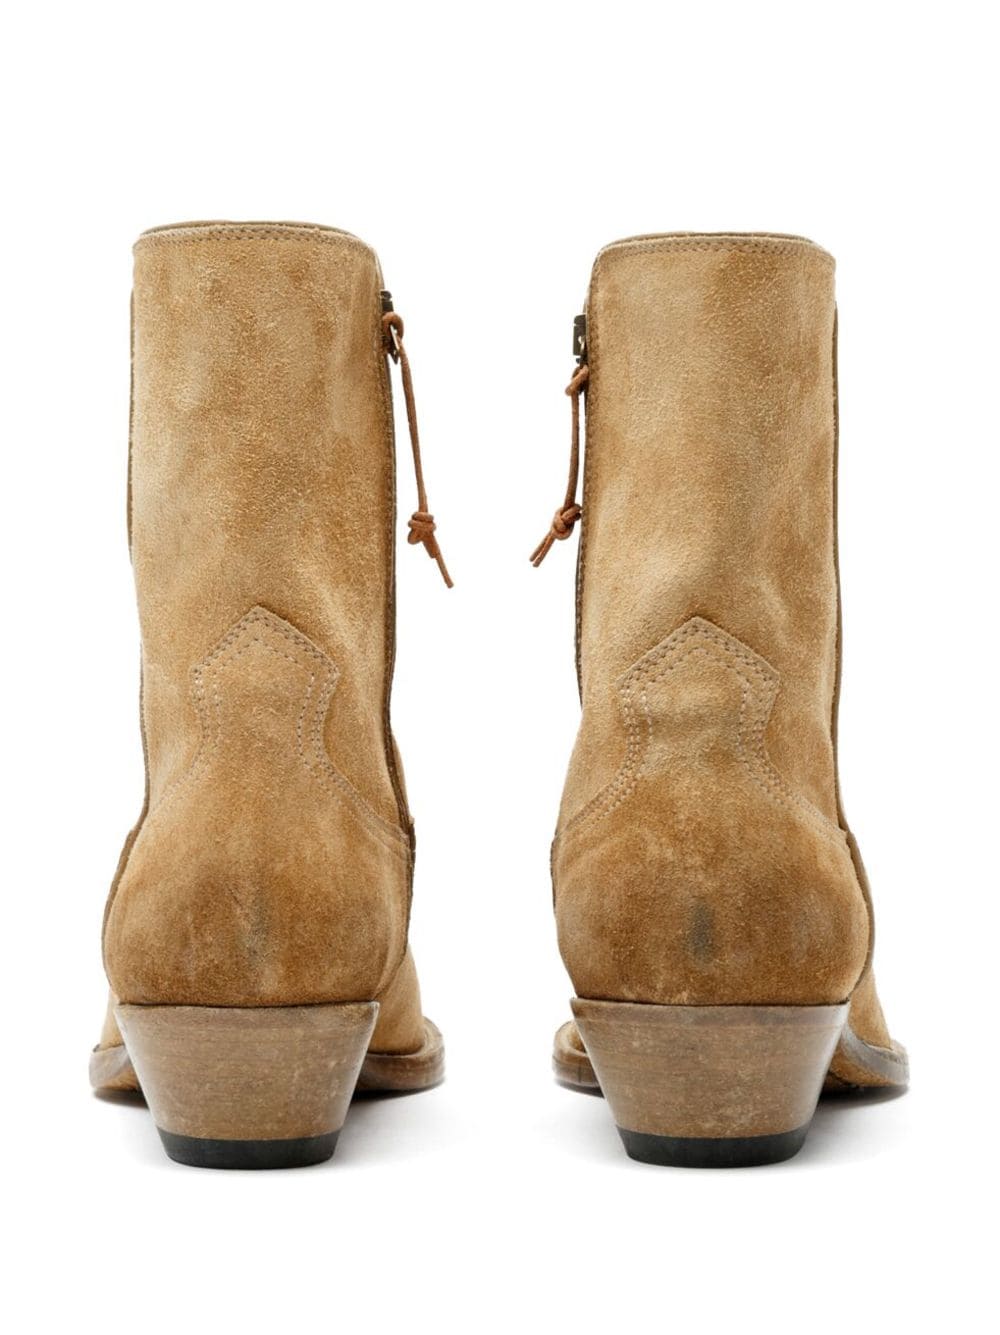 POINTED-TOE WESTERN SUEDE BOOTS